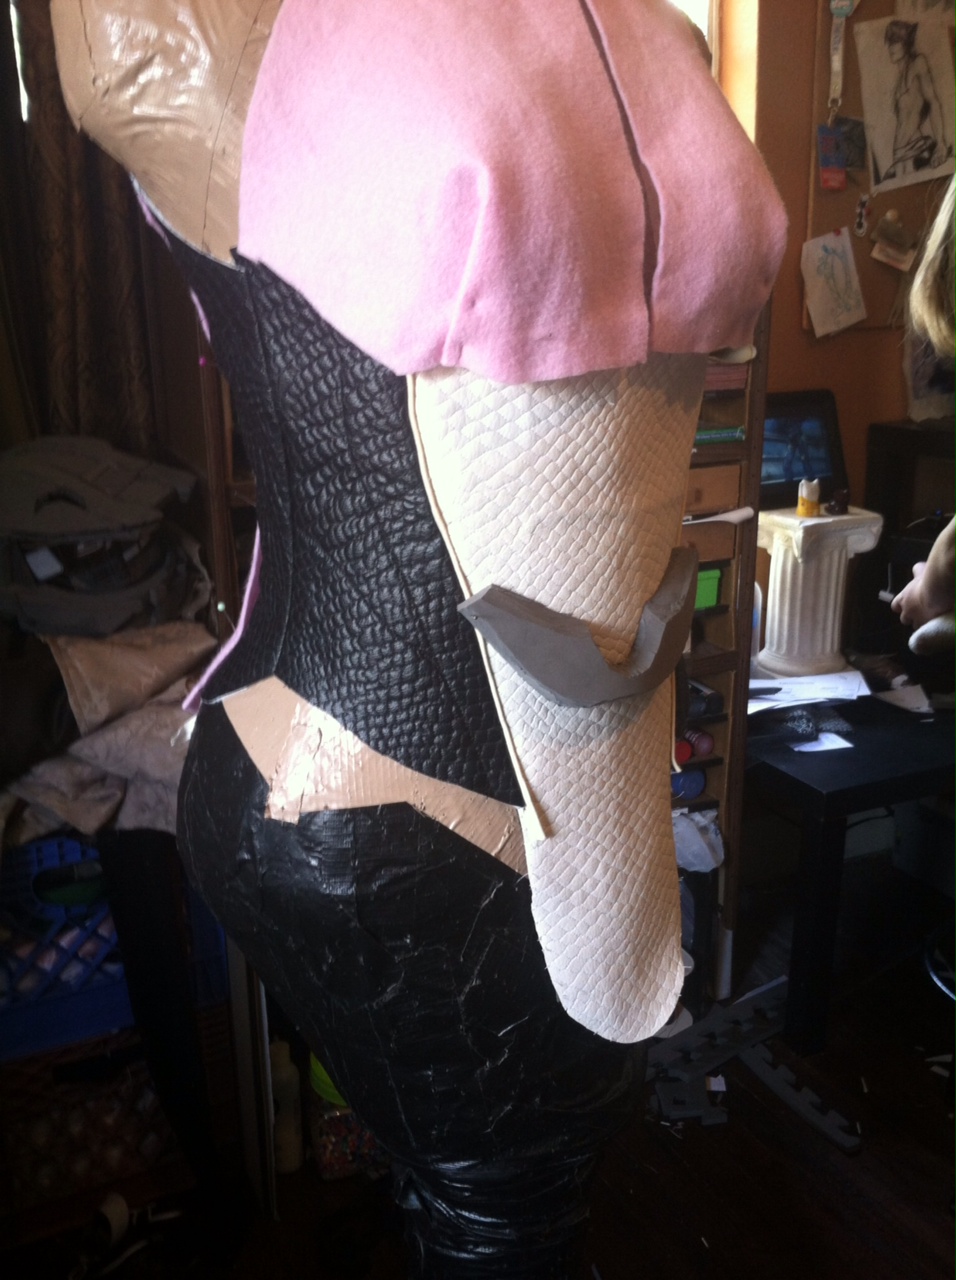 Bodysuit   WIP 3 - Starting to see the final product emerge!